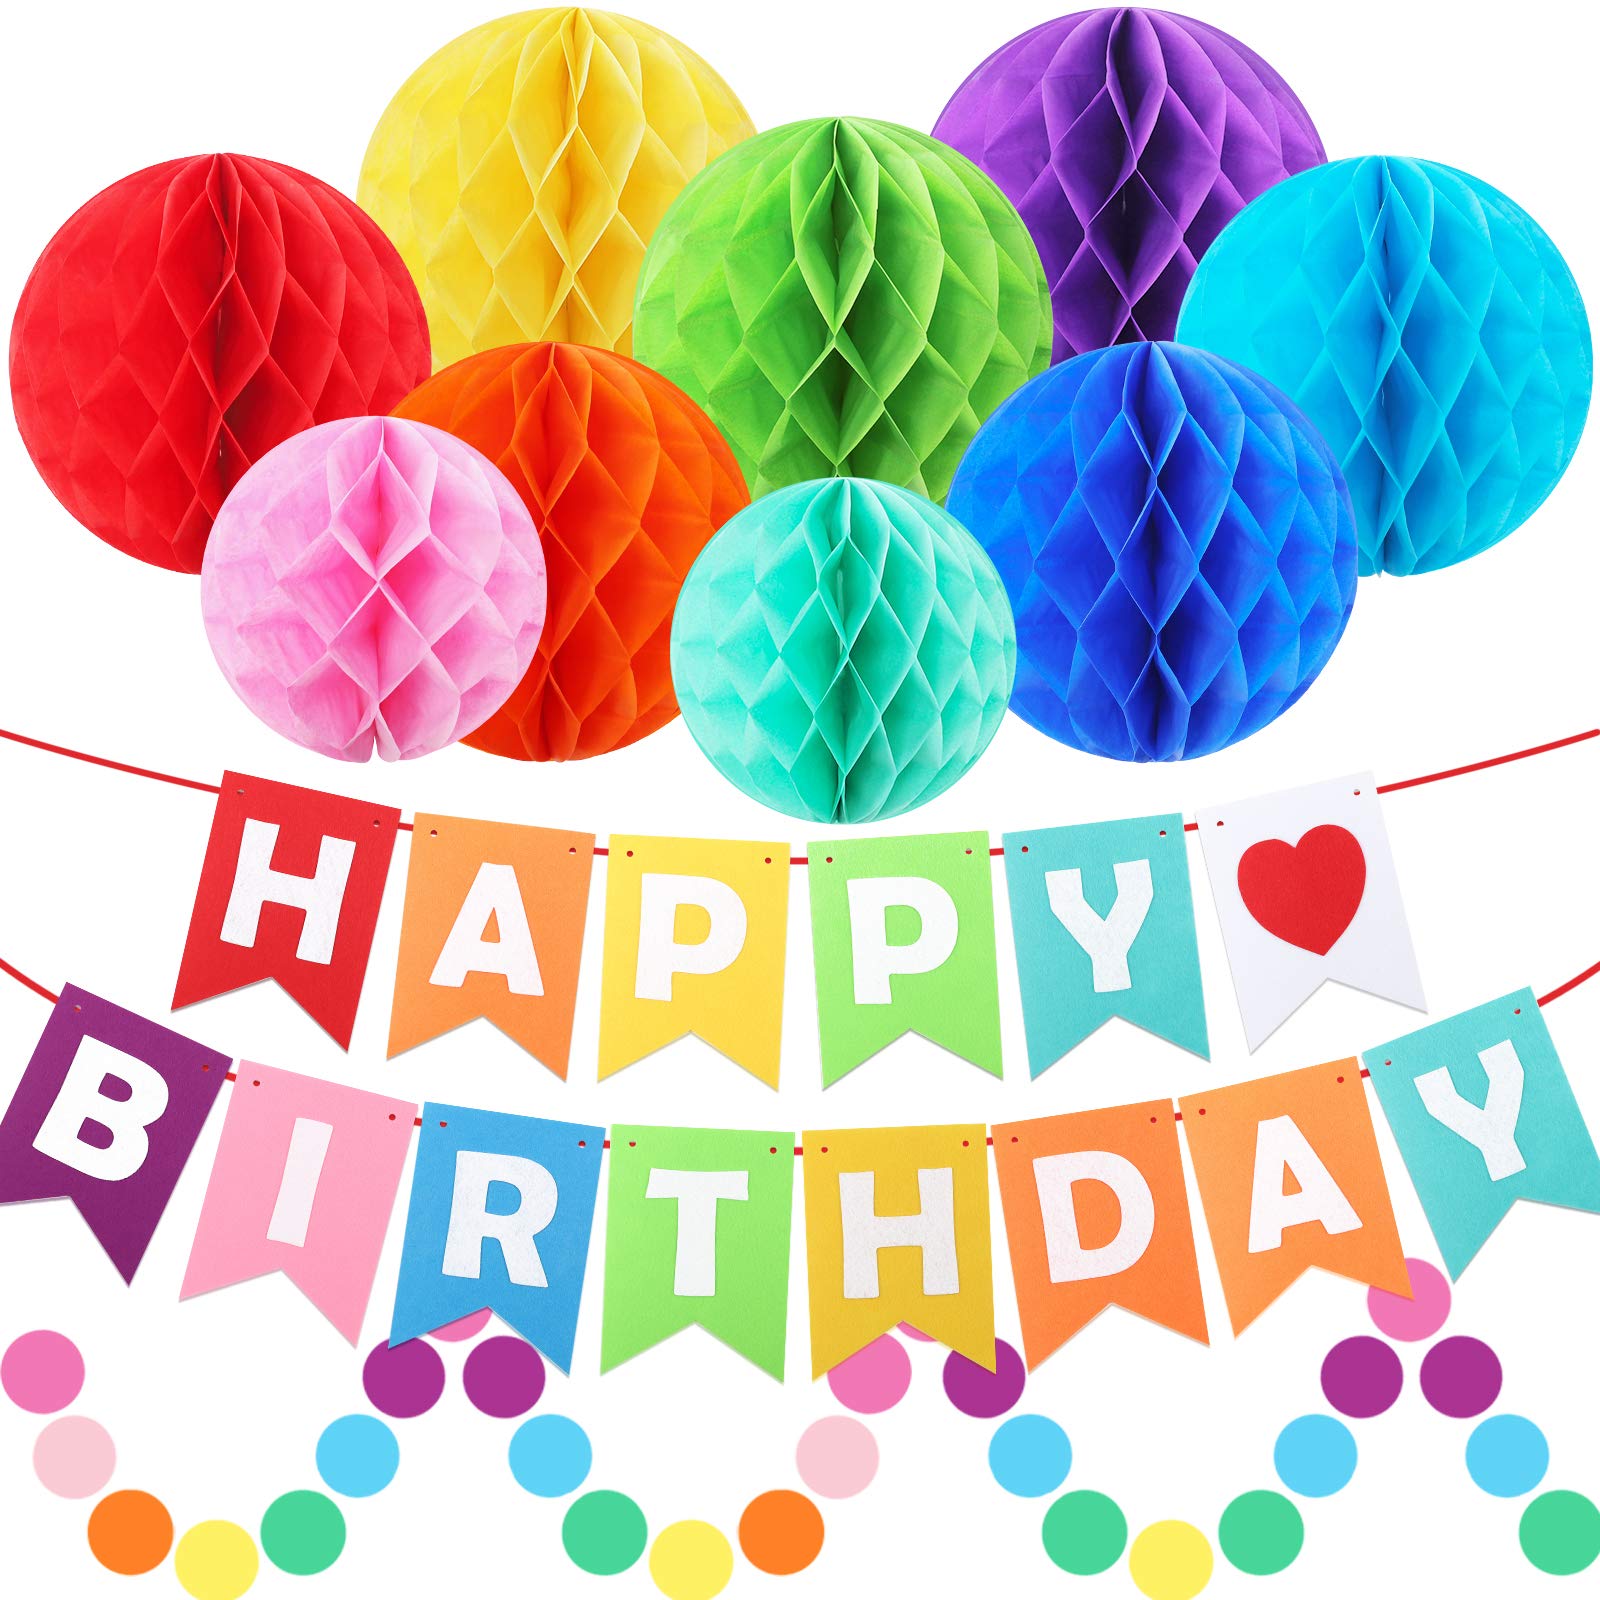 ZJHAI Birthday Decorations, Rainbow Birthday Party Poms Decorations for Women and Girls, Include Happy Birthday Banner, Colorful Paper